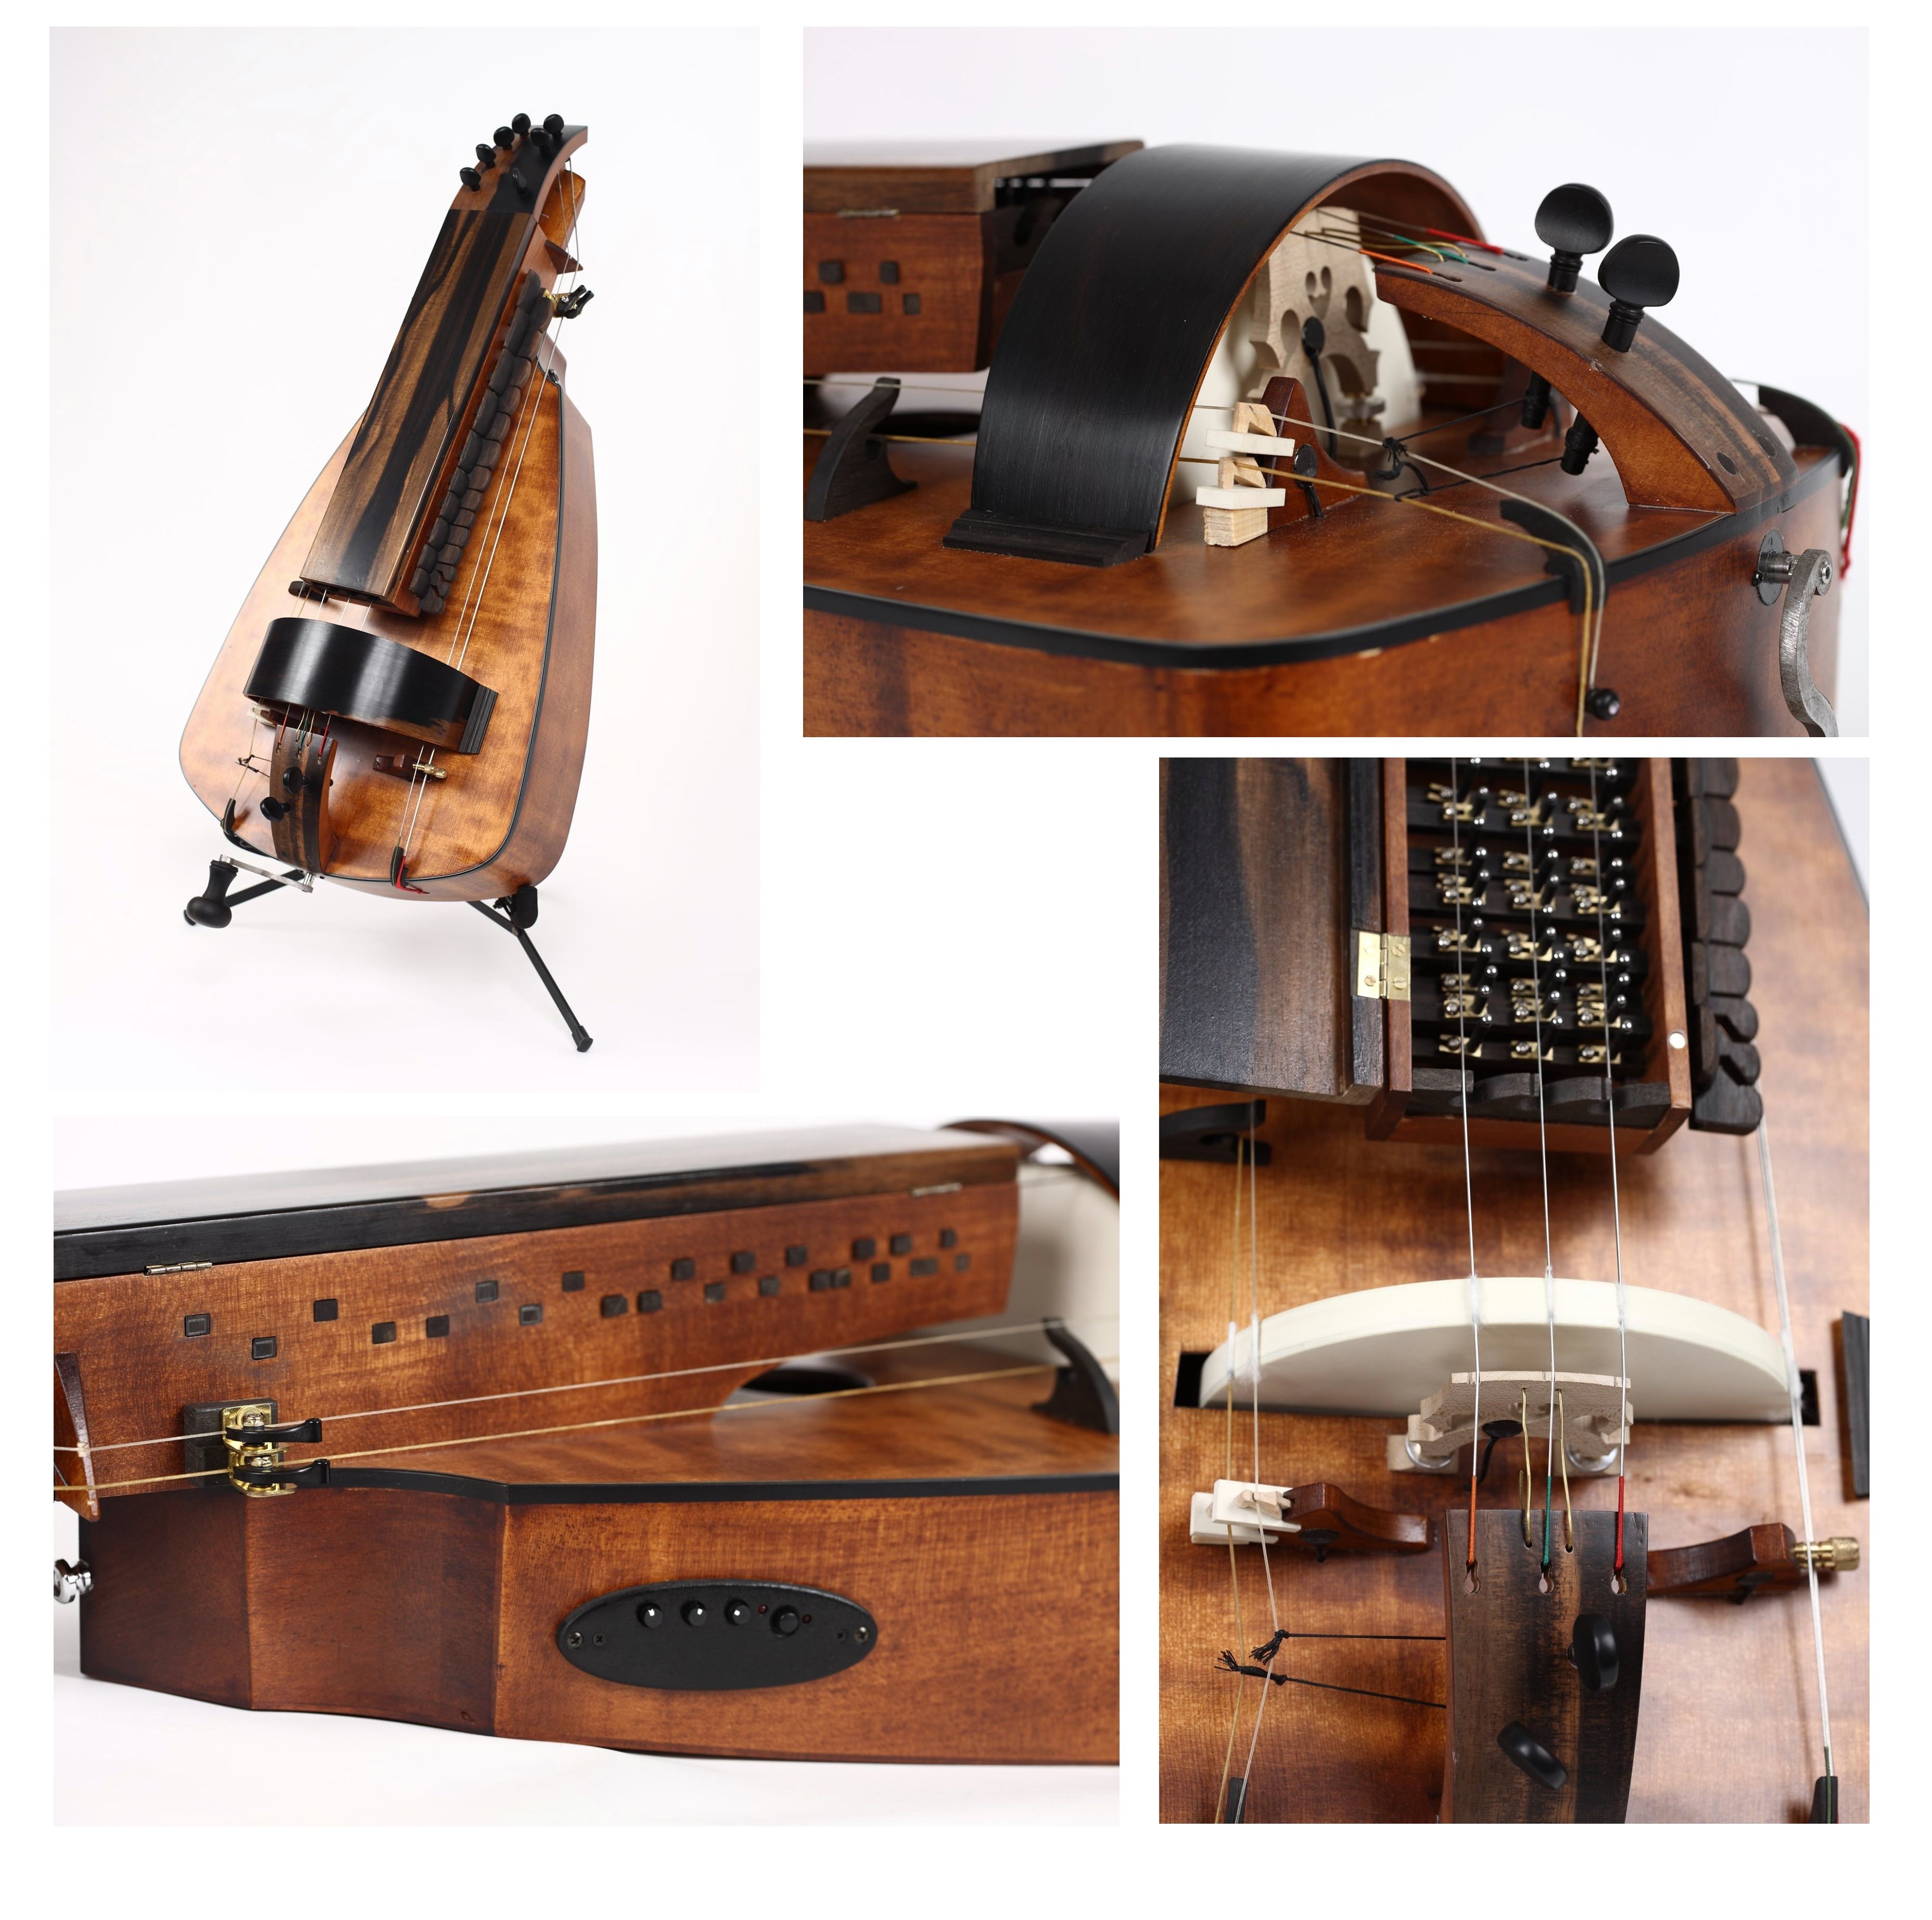 Hurdy-gurdy used to be nicknamed "mare's head".